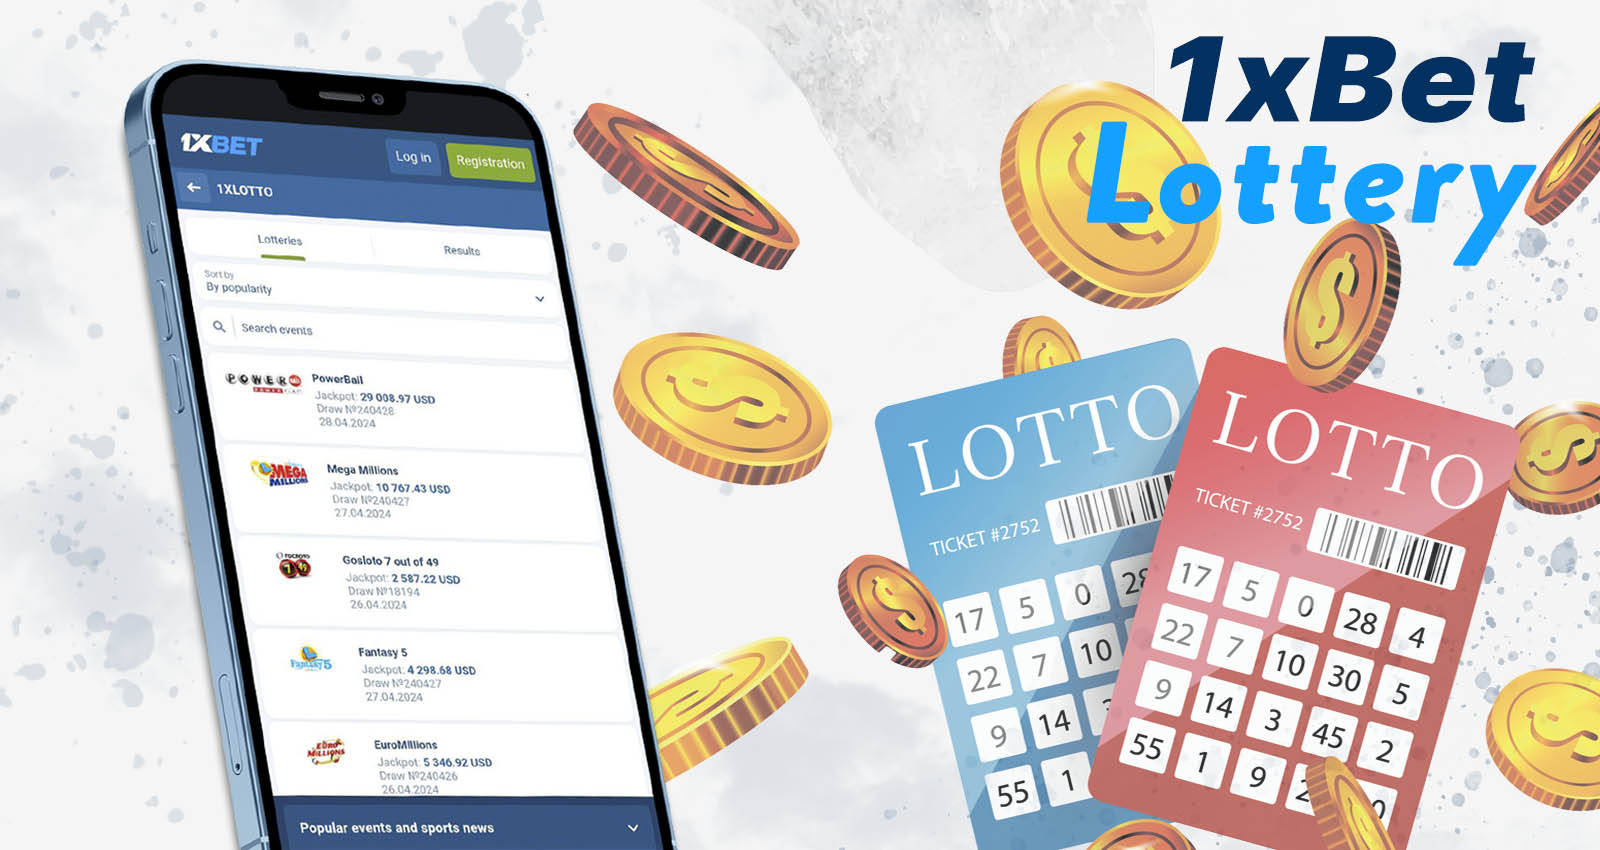 Lottery Games on 1xBet